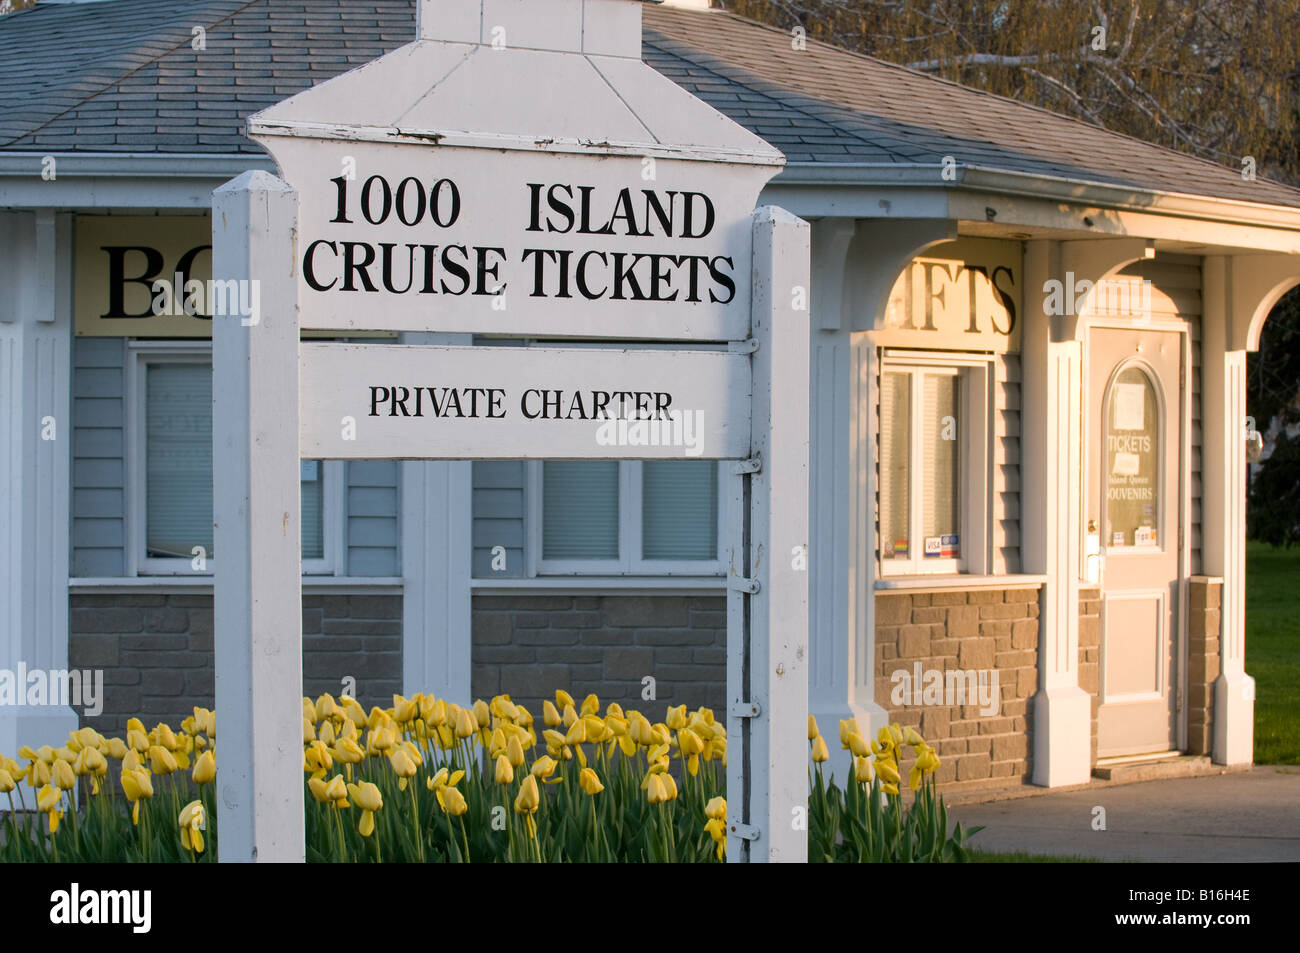 St. Lawrence River 1000 Island Cruise Tickets purchasing location in Kingston, Ontario, Canada. Stock Photo